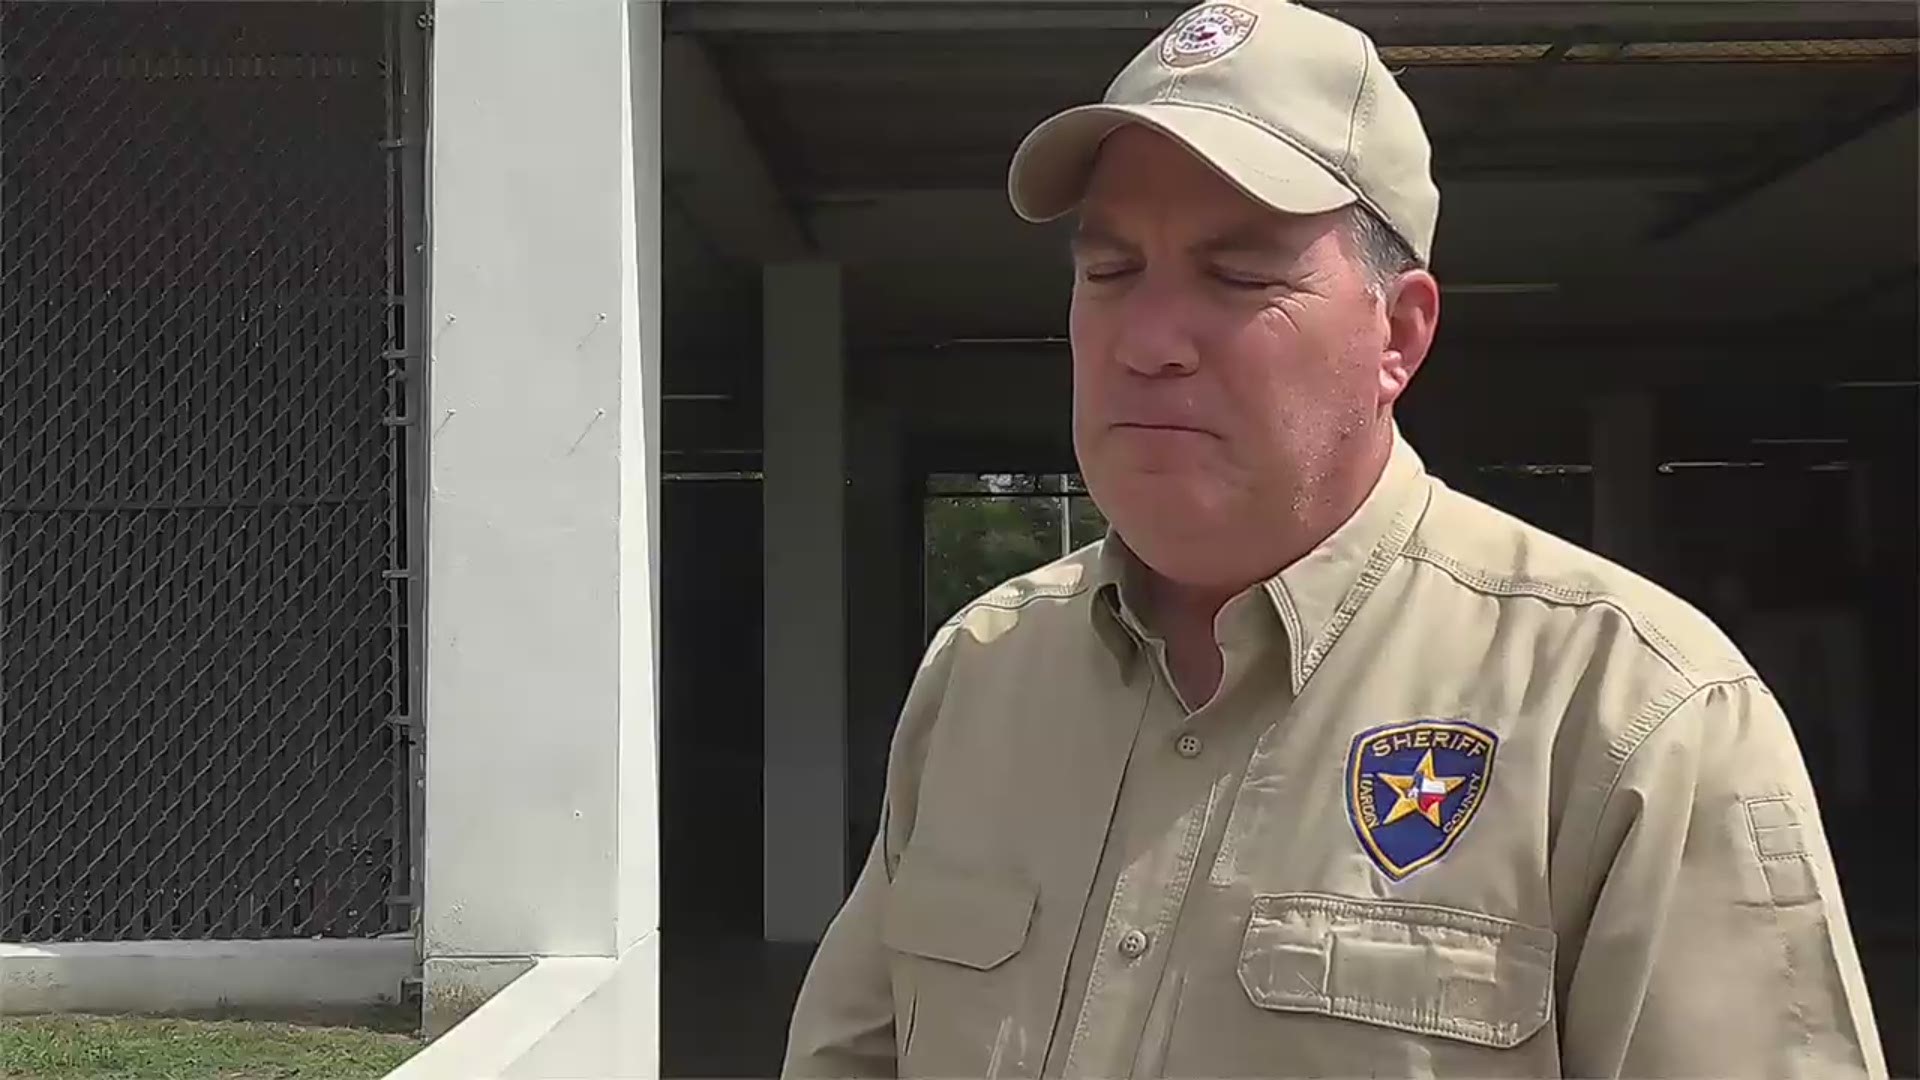 Full interview with Hardin County Sheriff Mark Davis on Sour Lake